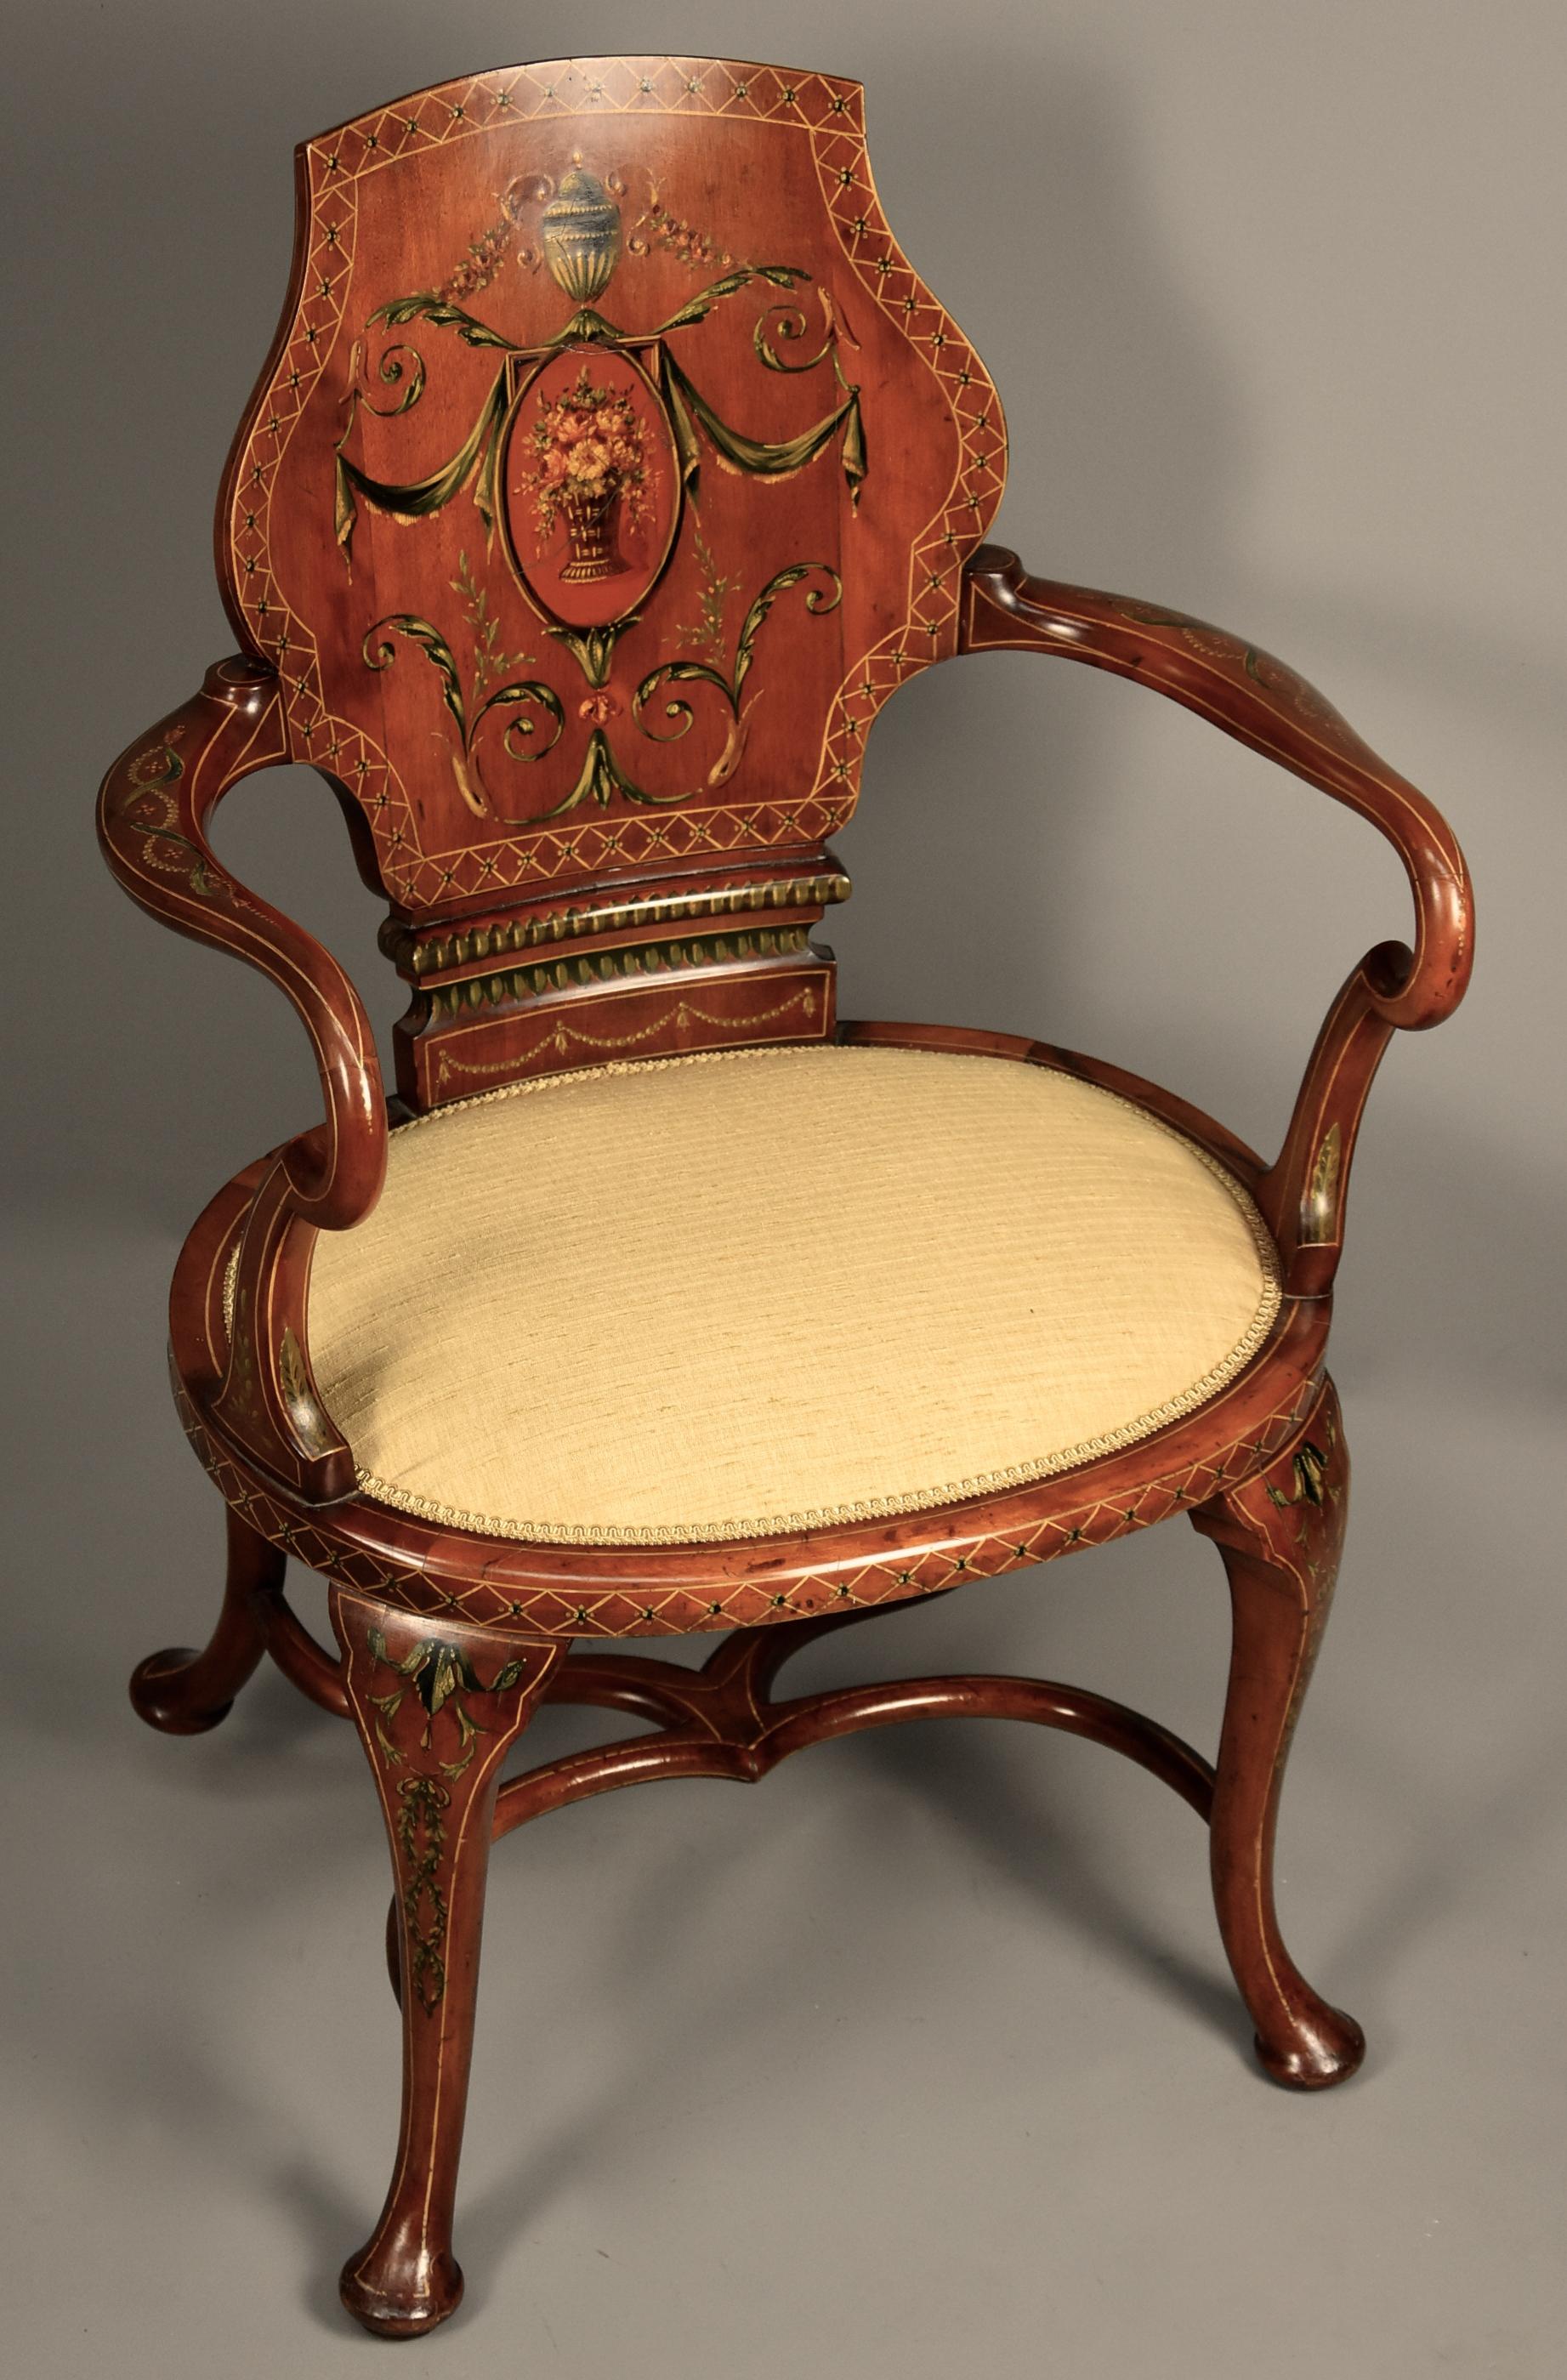 Highly Decorative Edwardian Satinwood and Painted Armchair in the Georgian Style (Englisch) im Angebot